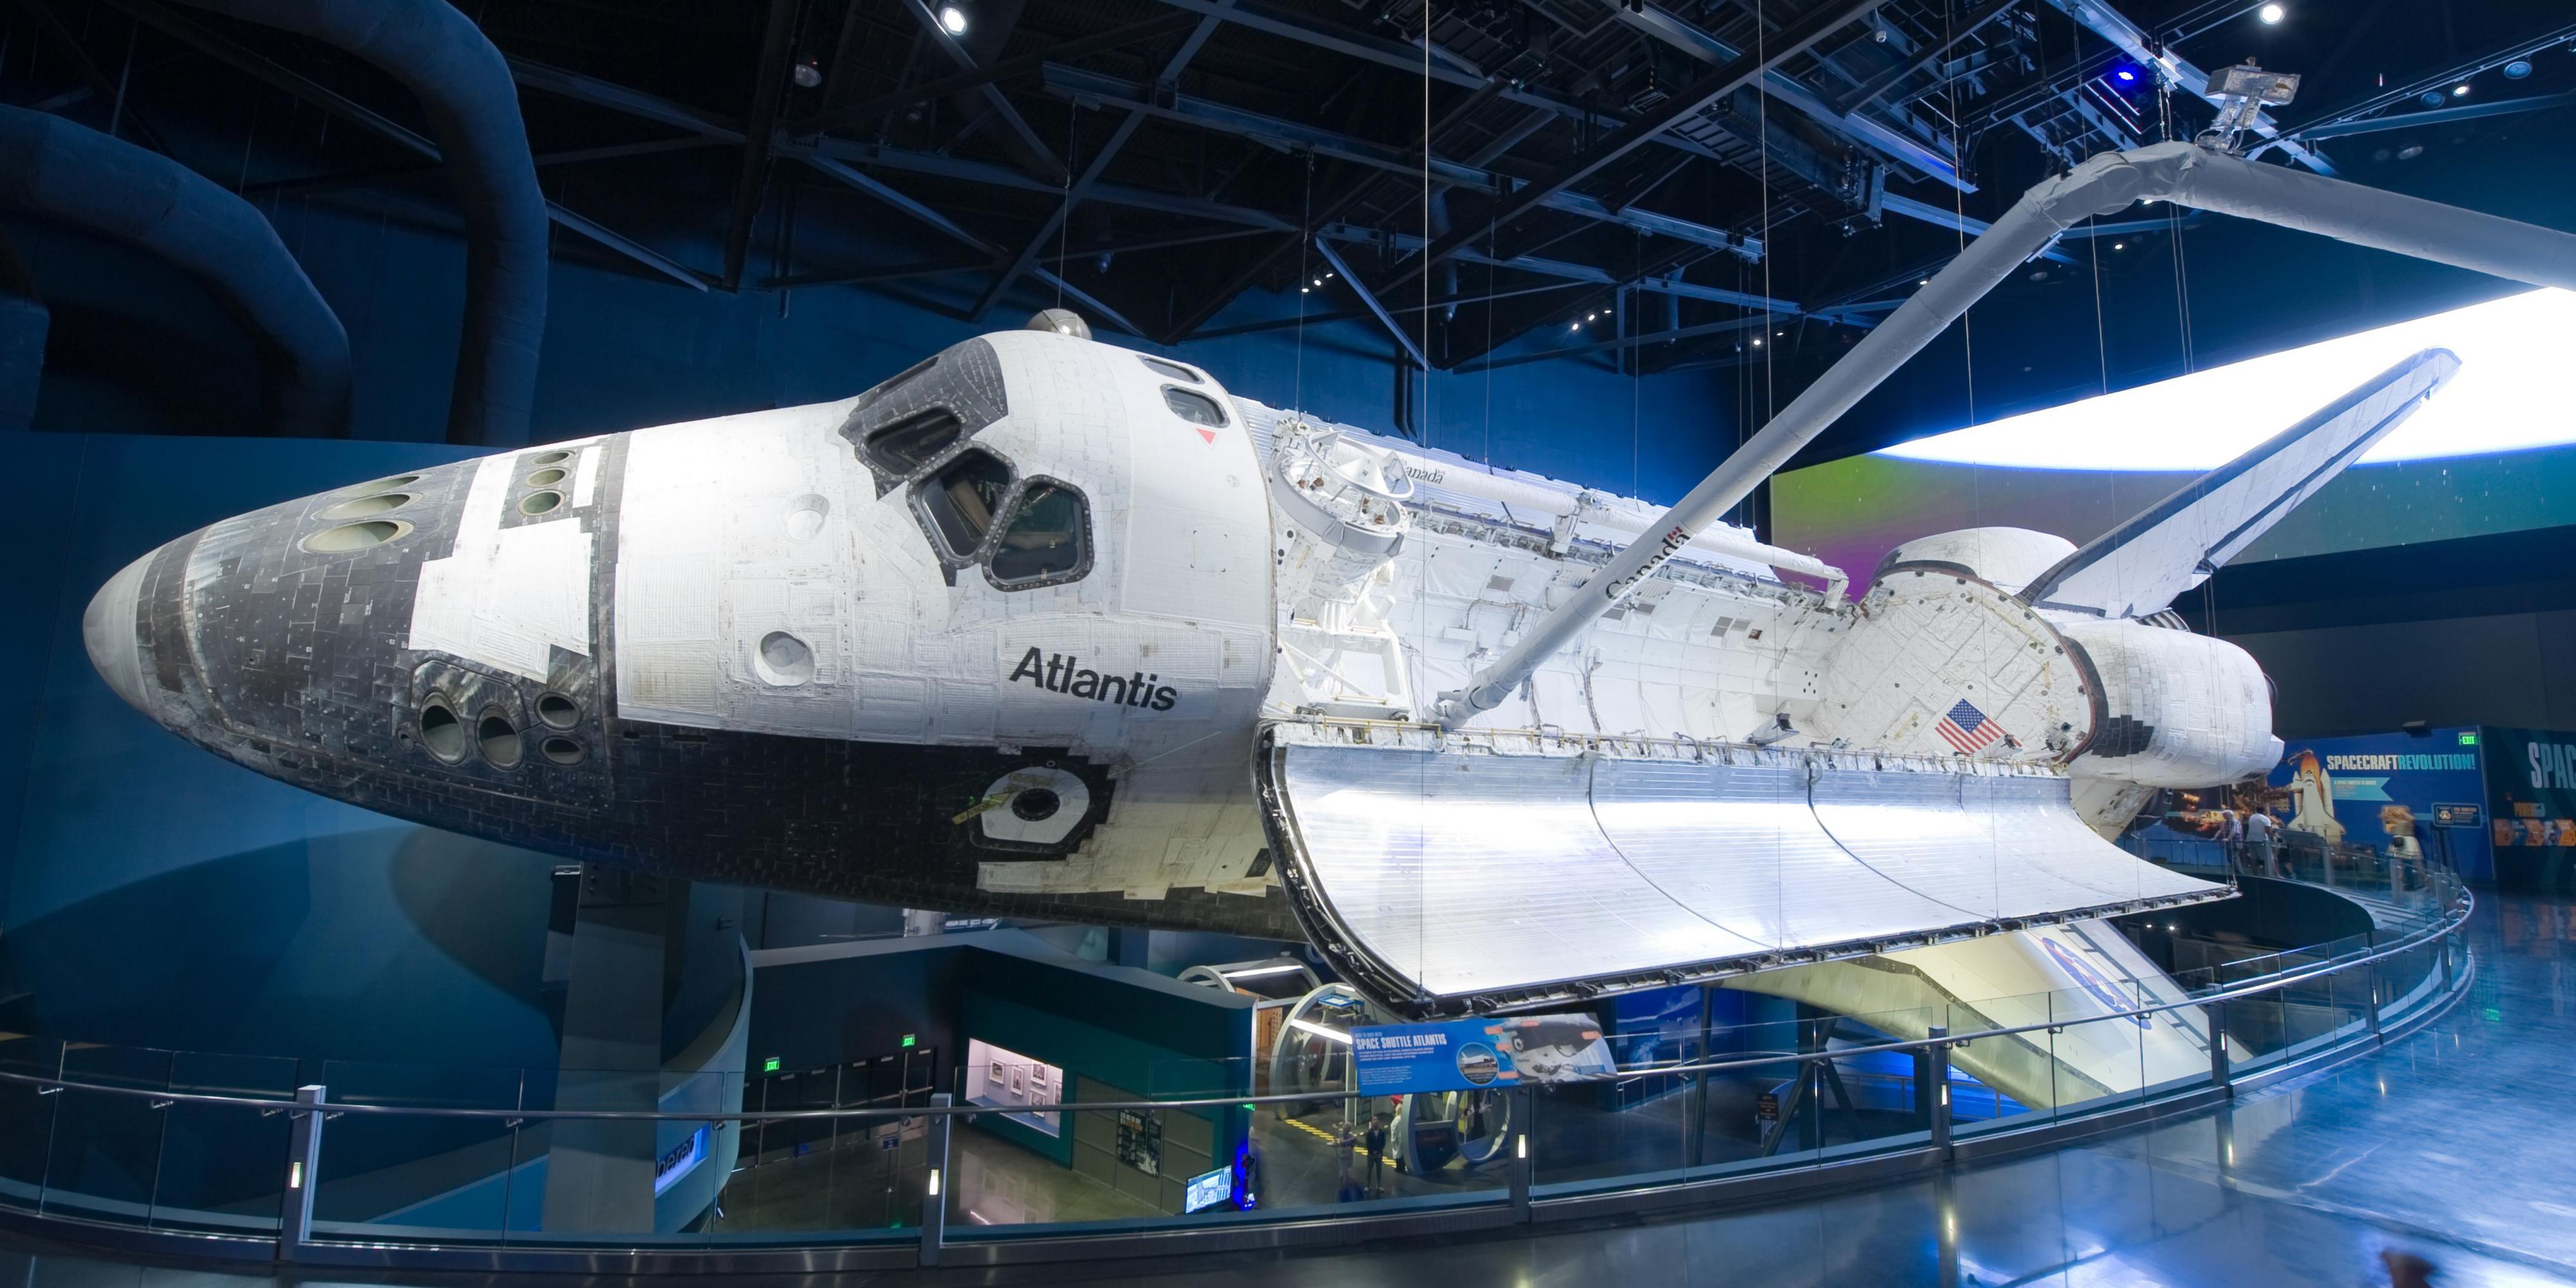 Visit the Kennedy Space Center Visitor Complex located 15 miles from the hotel. Check out the launch schedule and have front row seats to these iconic events.